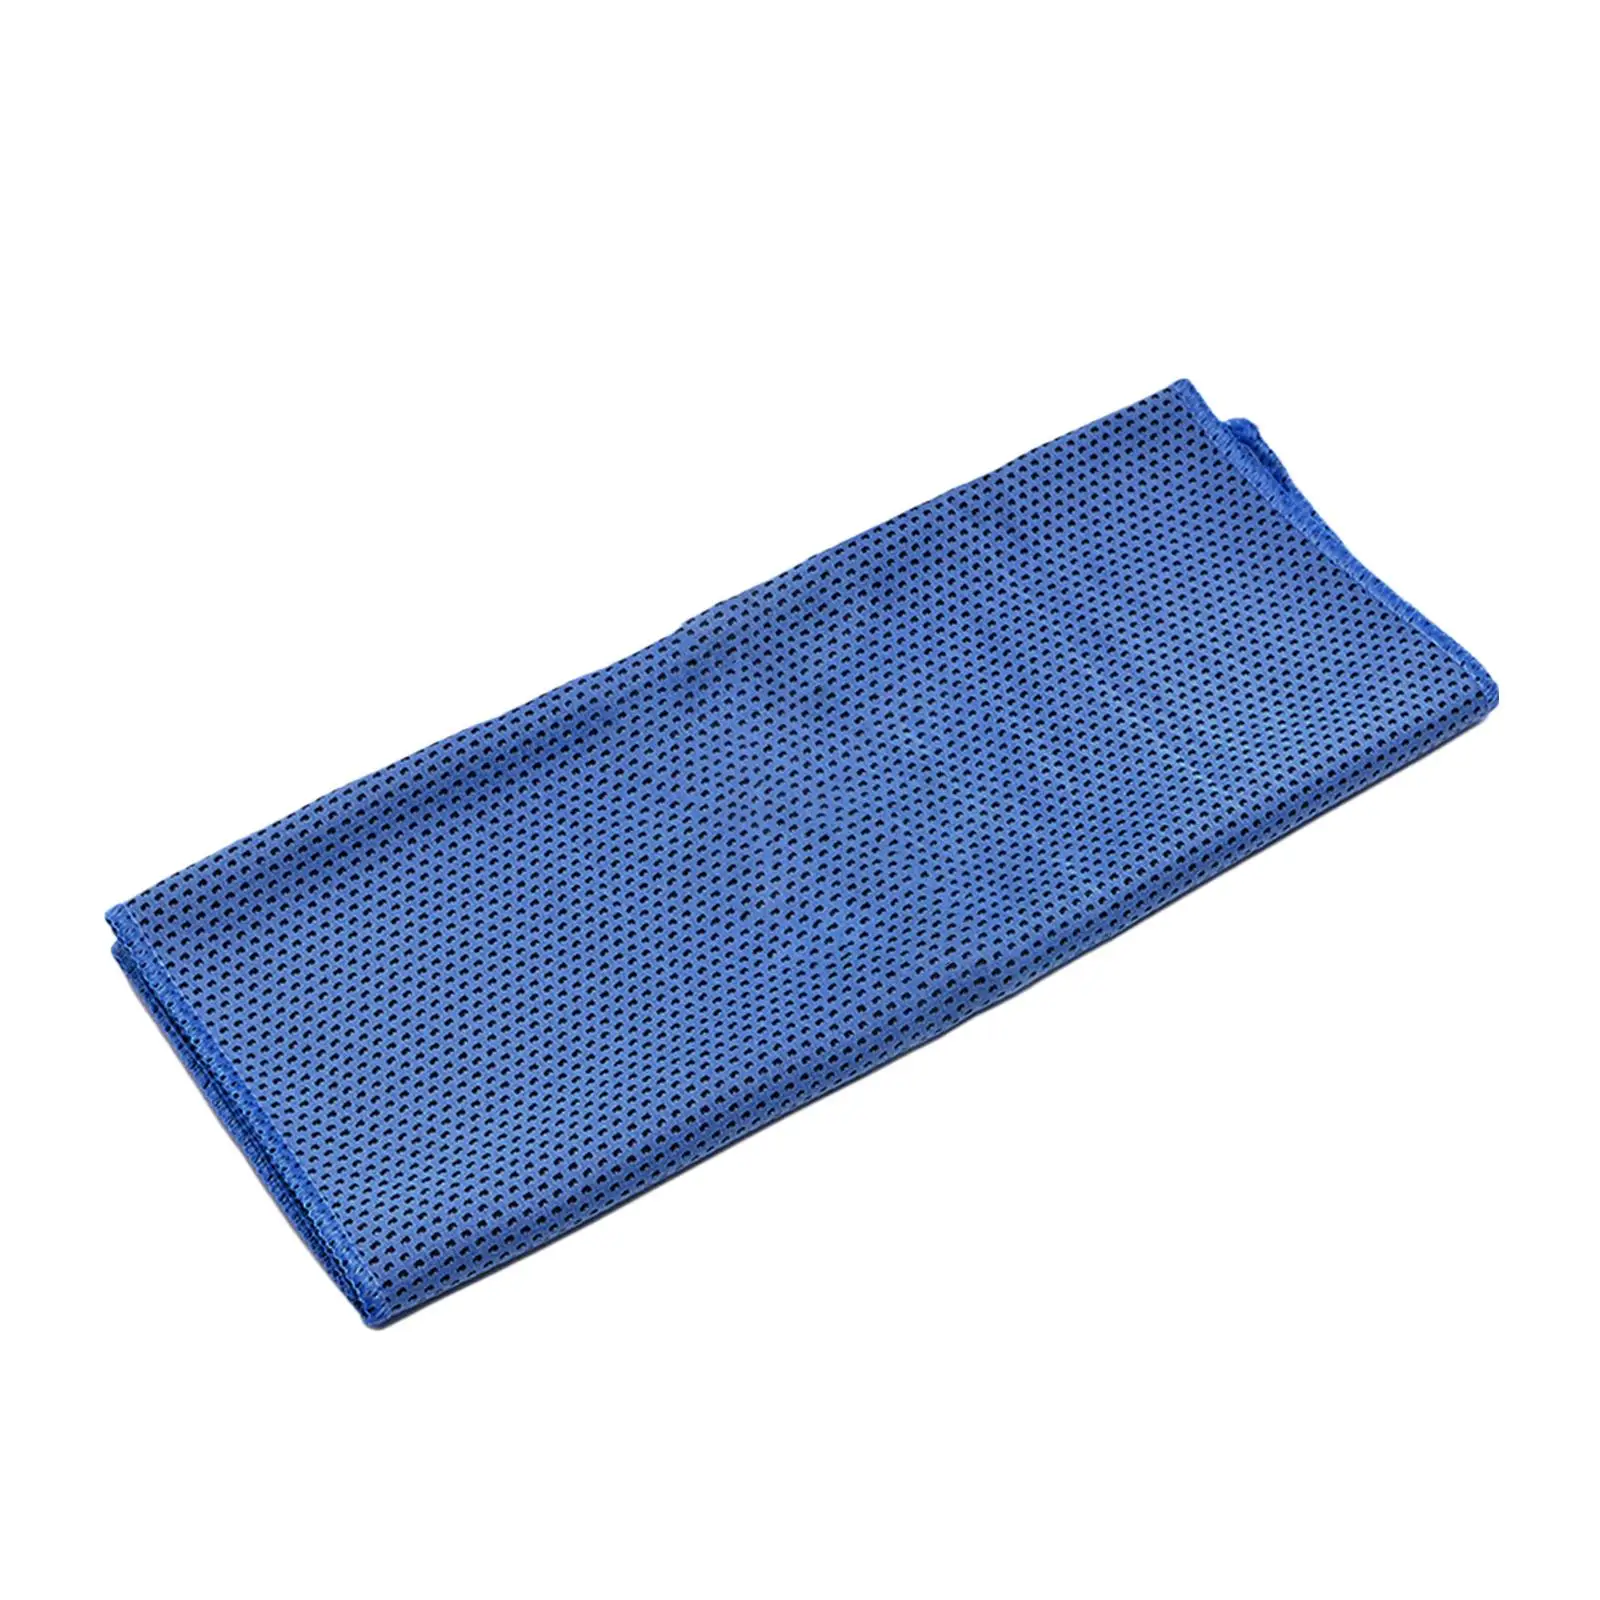 Cooling Towel Quick Dry for Neck and Face Breathable Chilly Towel Cool Towel for Running Camping Hiking Basketball Jogging